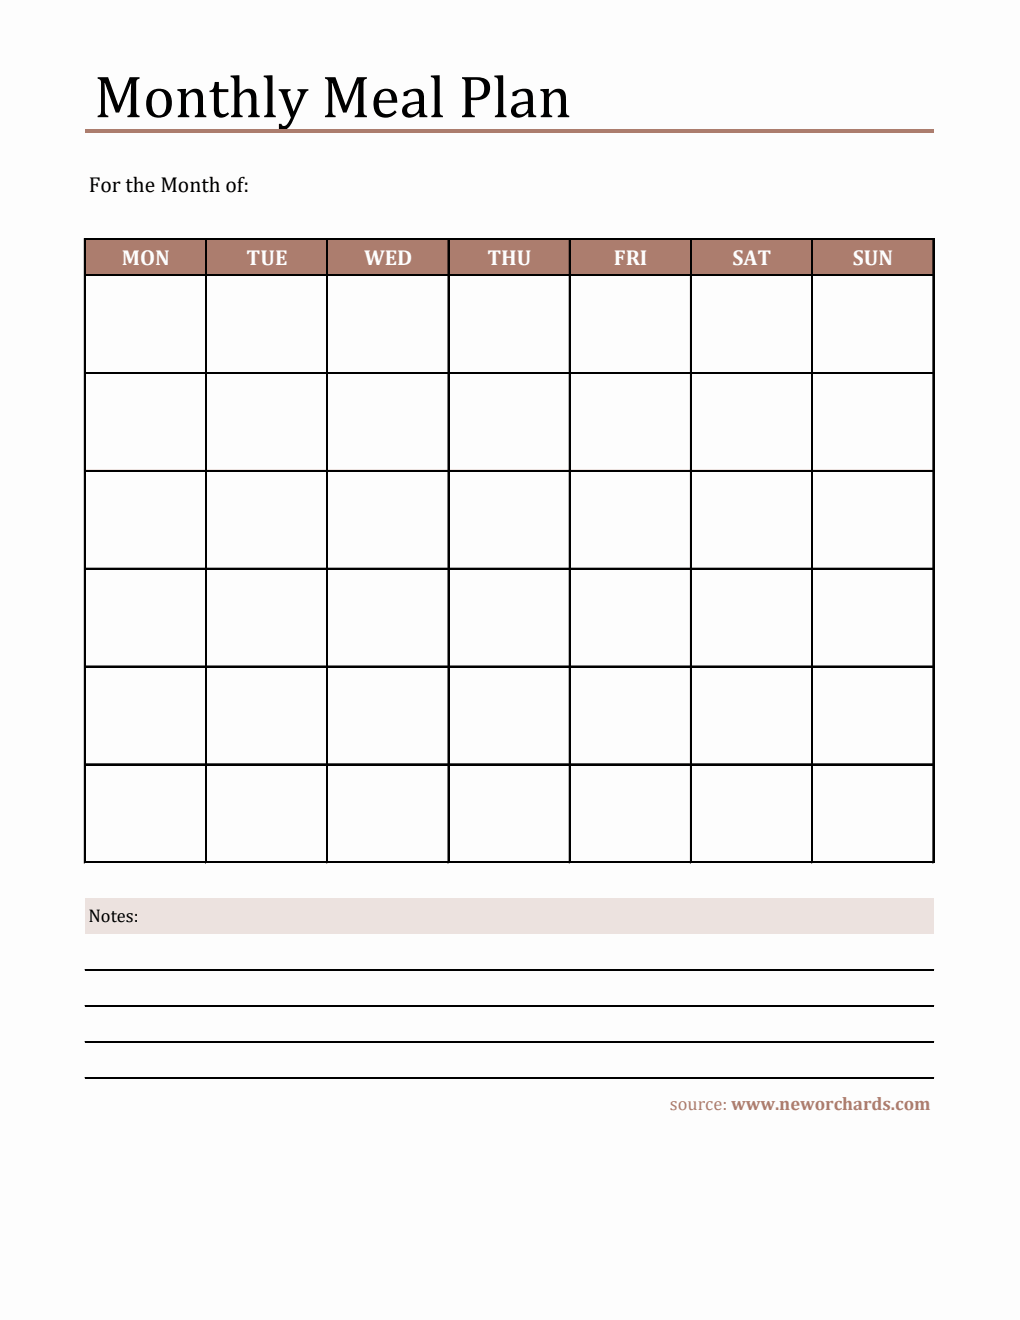 Downloadable Monthly Meal Plan Template - Excel